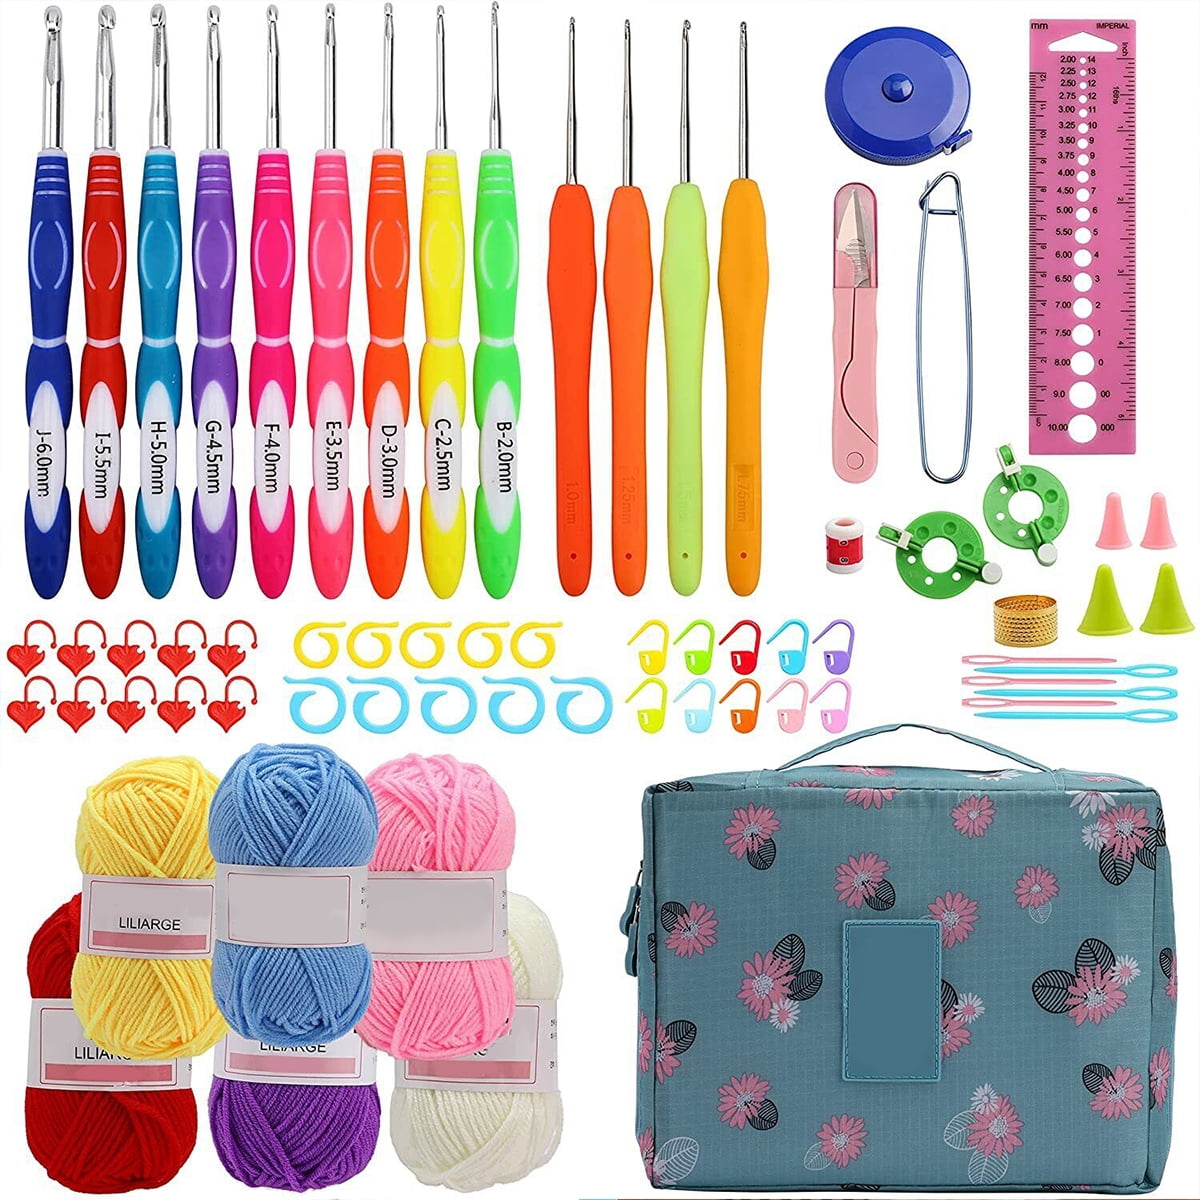 53Pcs Crochet Kits for Beginners Colorful Crochet Hook Set with Storage Bag  ゃ